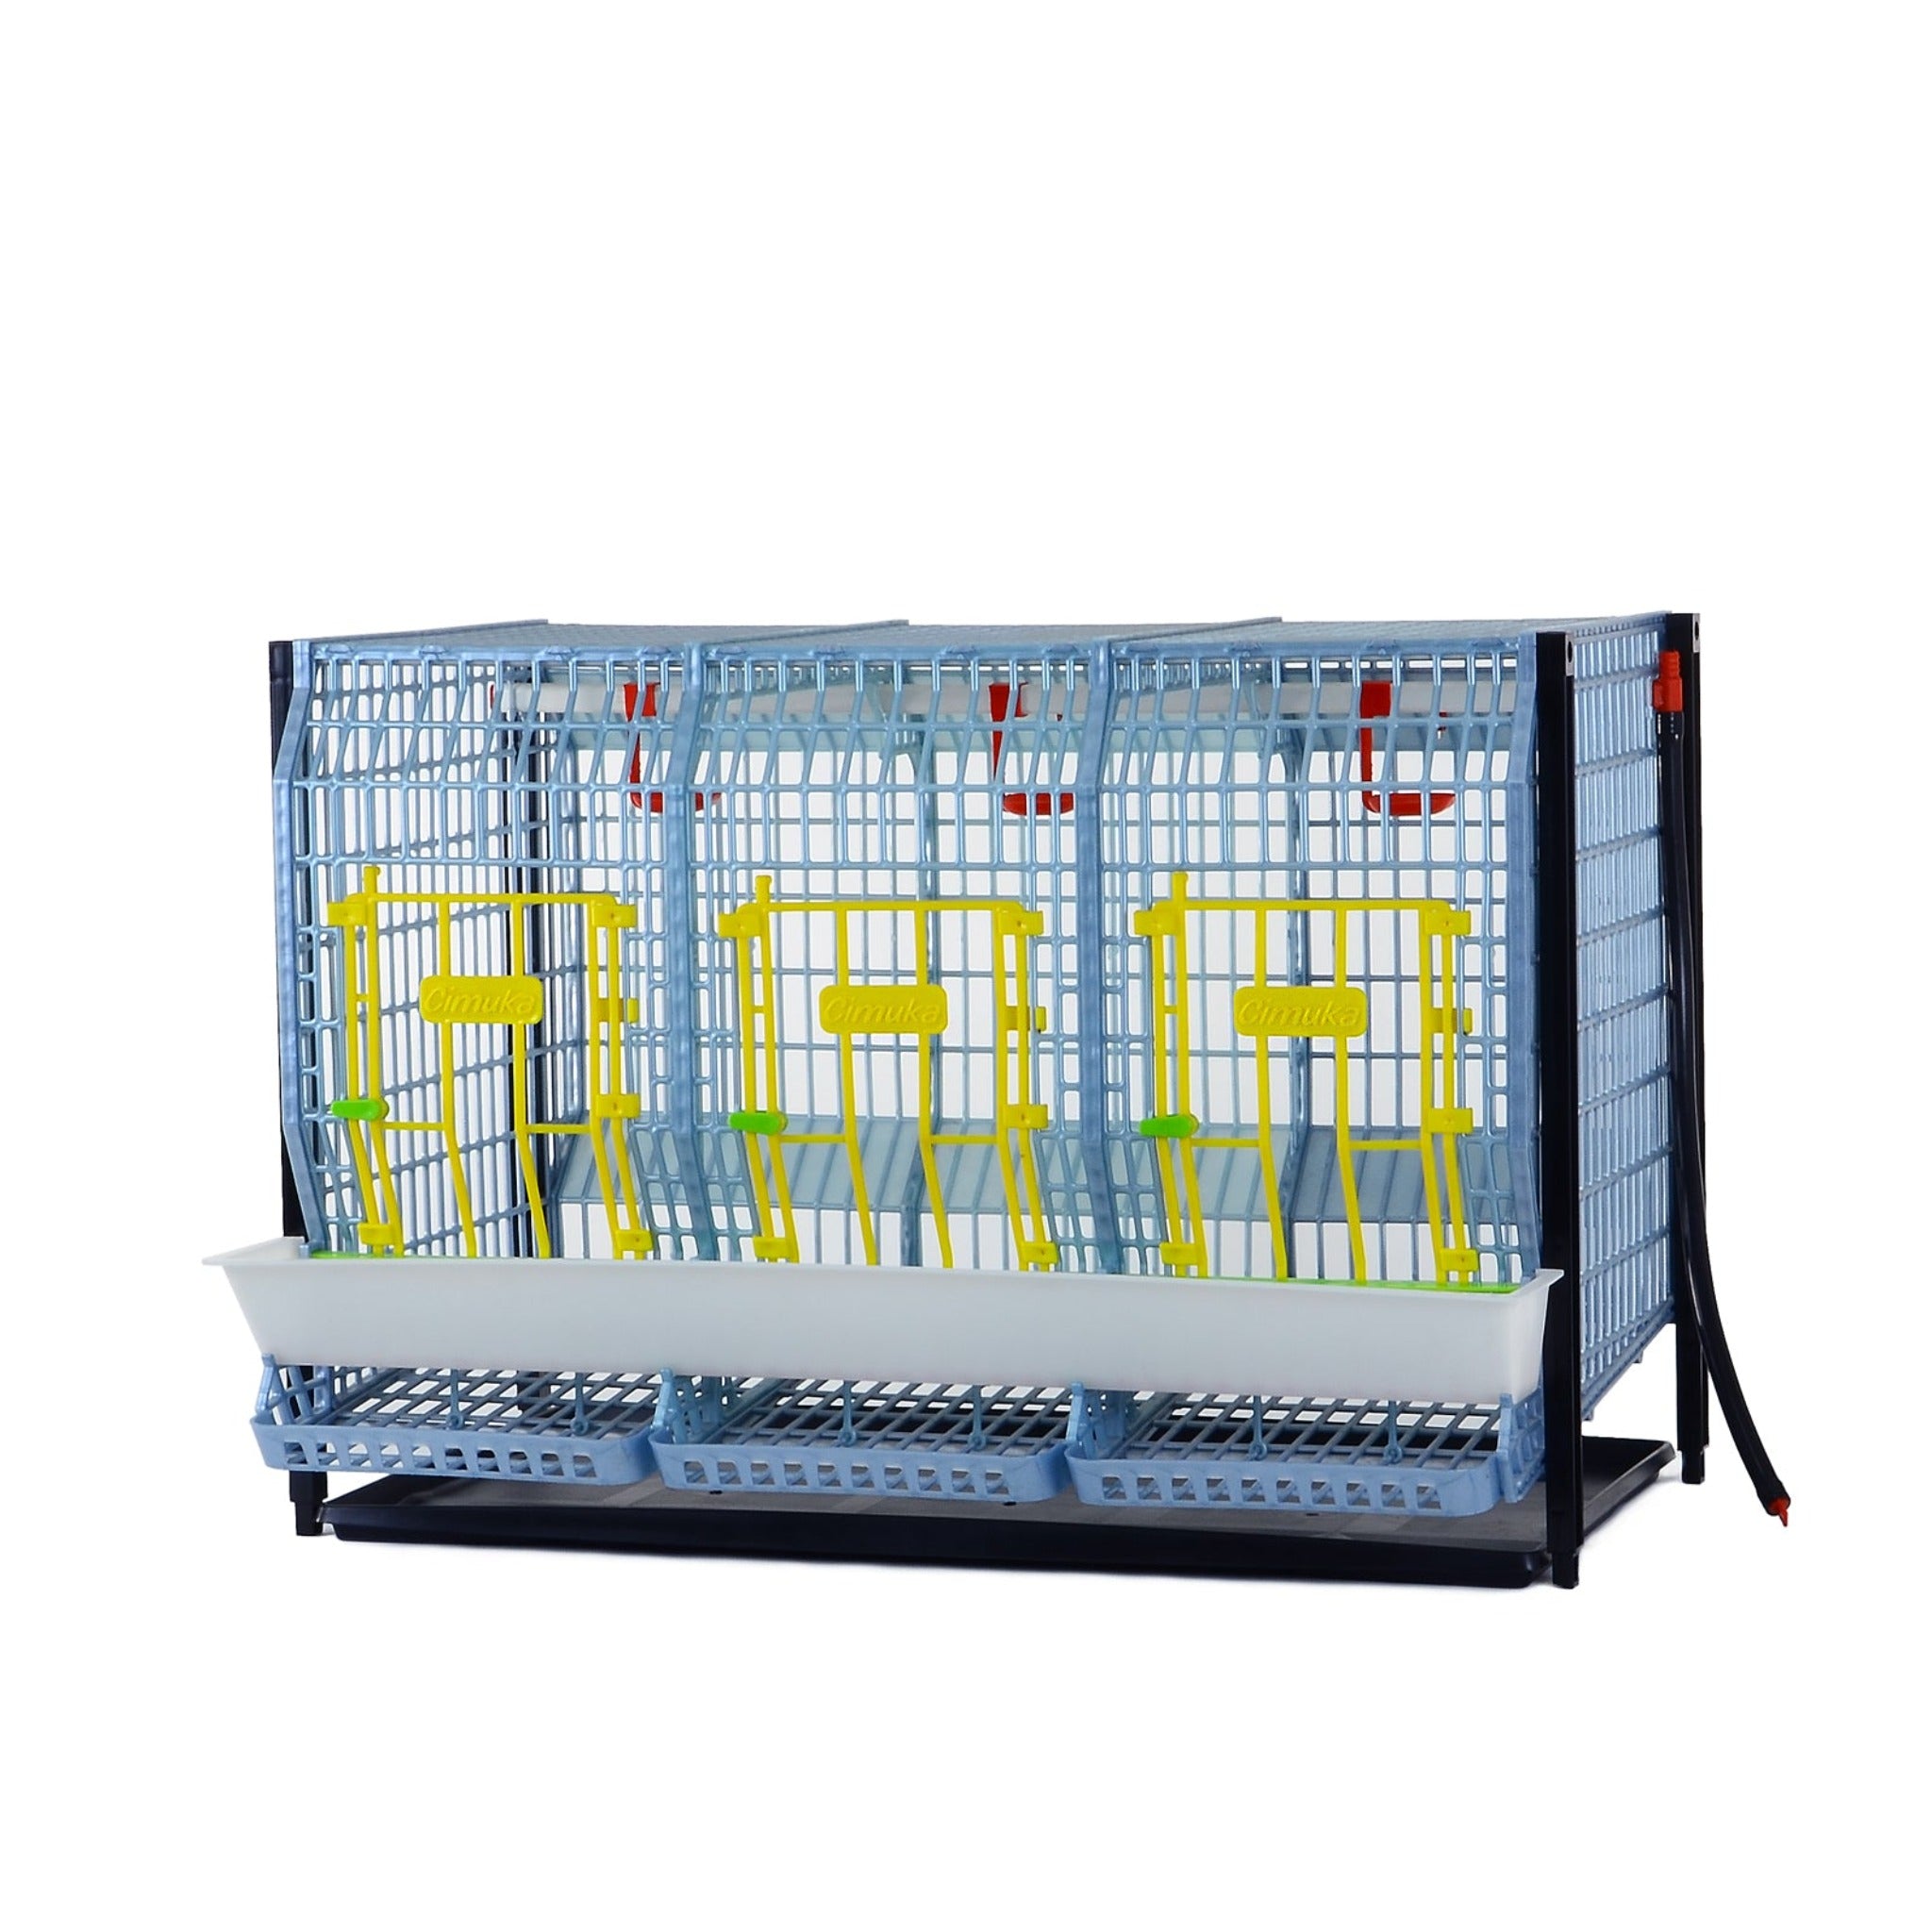 Hatching Time Cimuka. TYK60 22” Chicken cage layer addition. Image shows chicken cage front. Roll out egg trays can be seen on front under feeding trough. Water hose going down for automatic drinker system on side of cage..